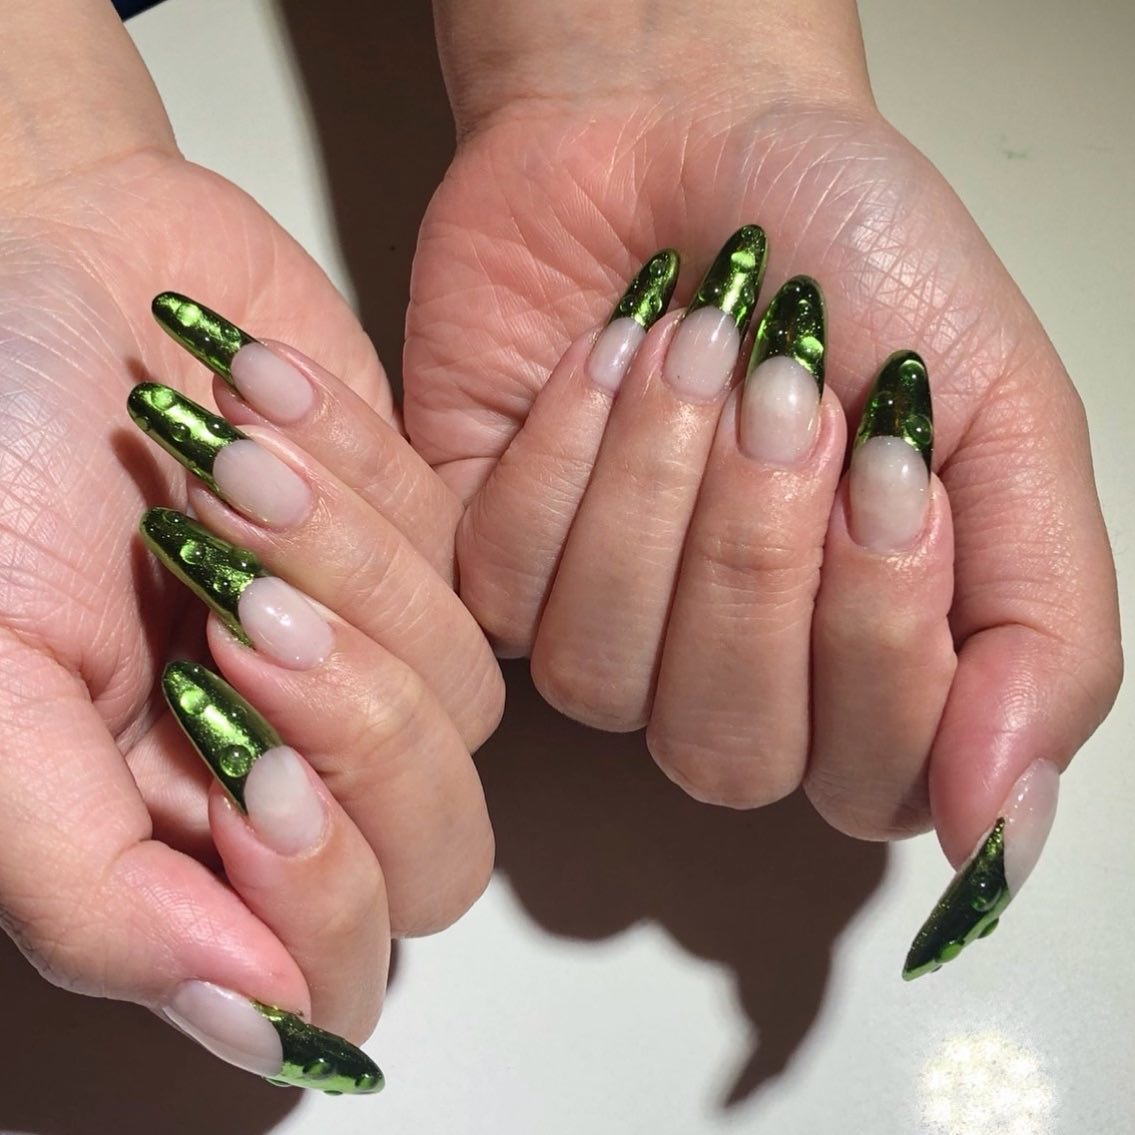 You can wear emeralds on your nails with this great mani. Emerald nail tips will take your manicure to a new level.